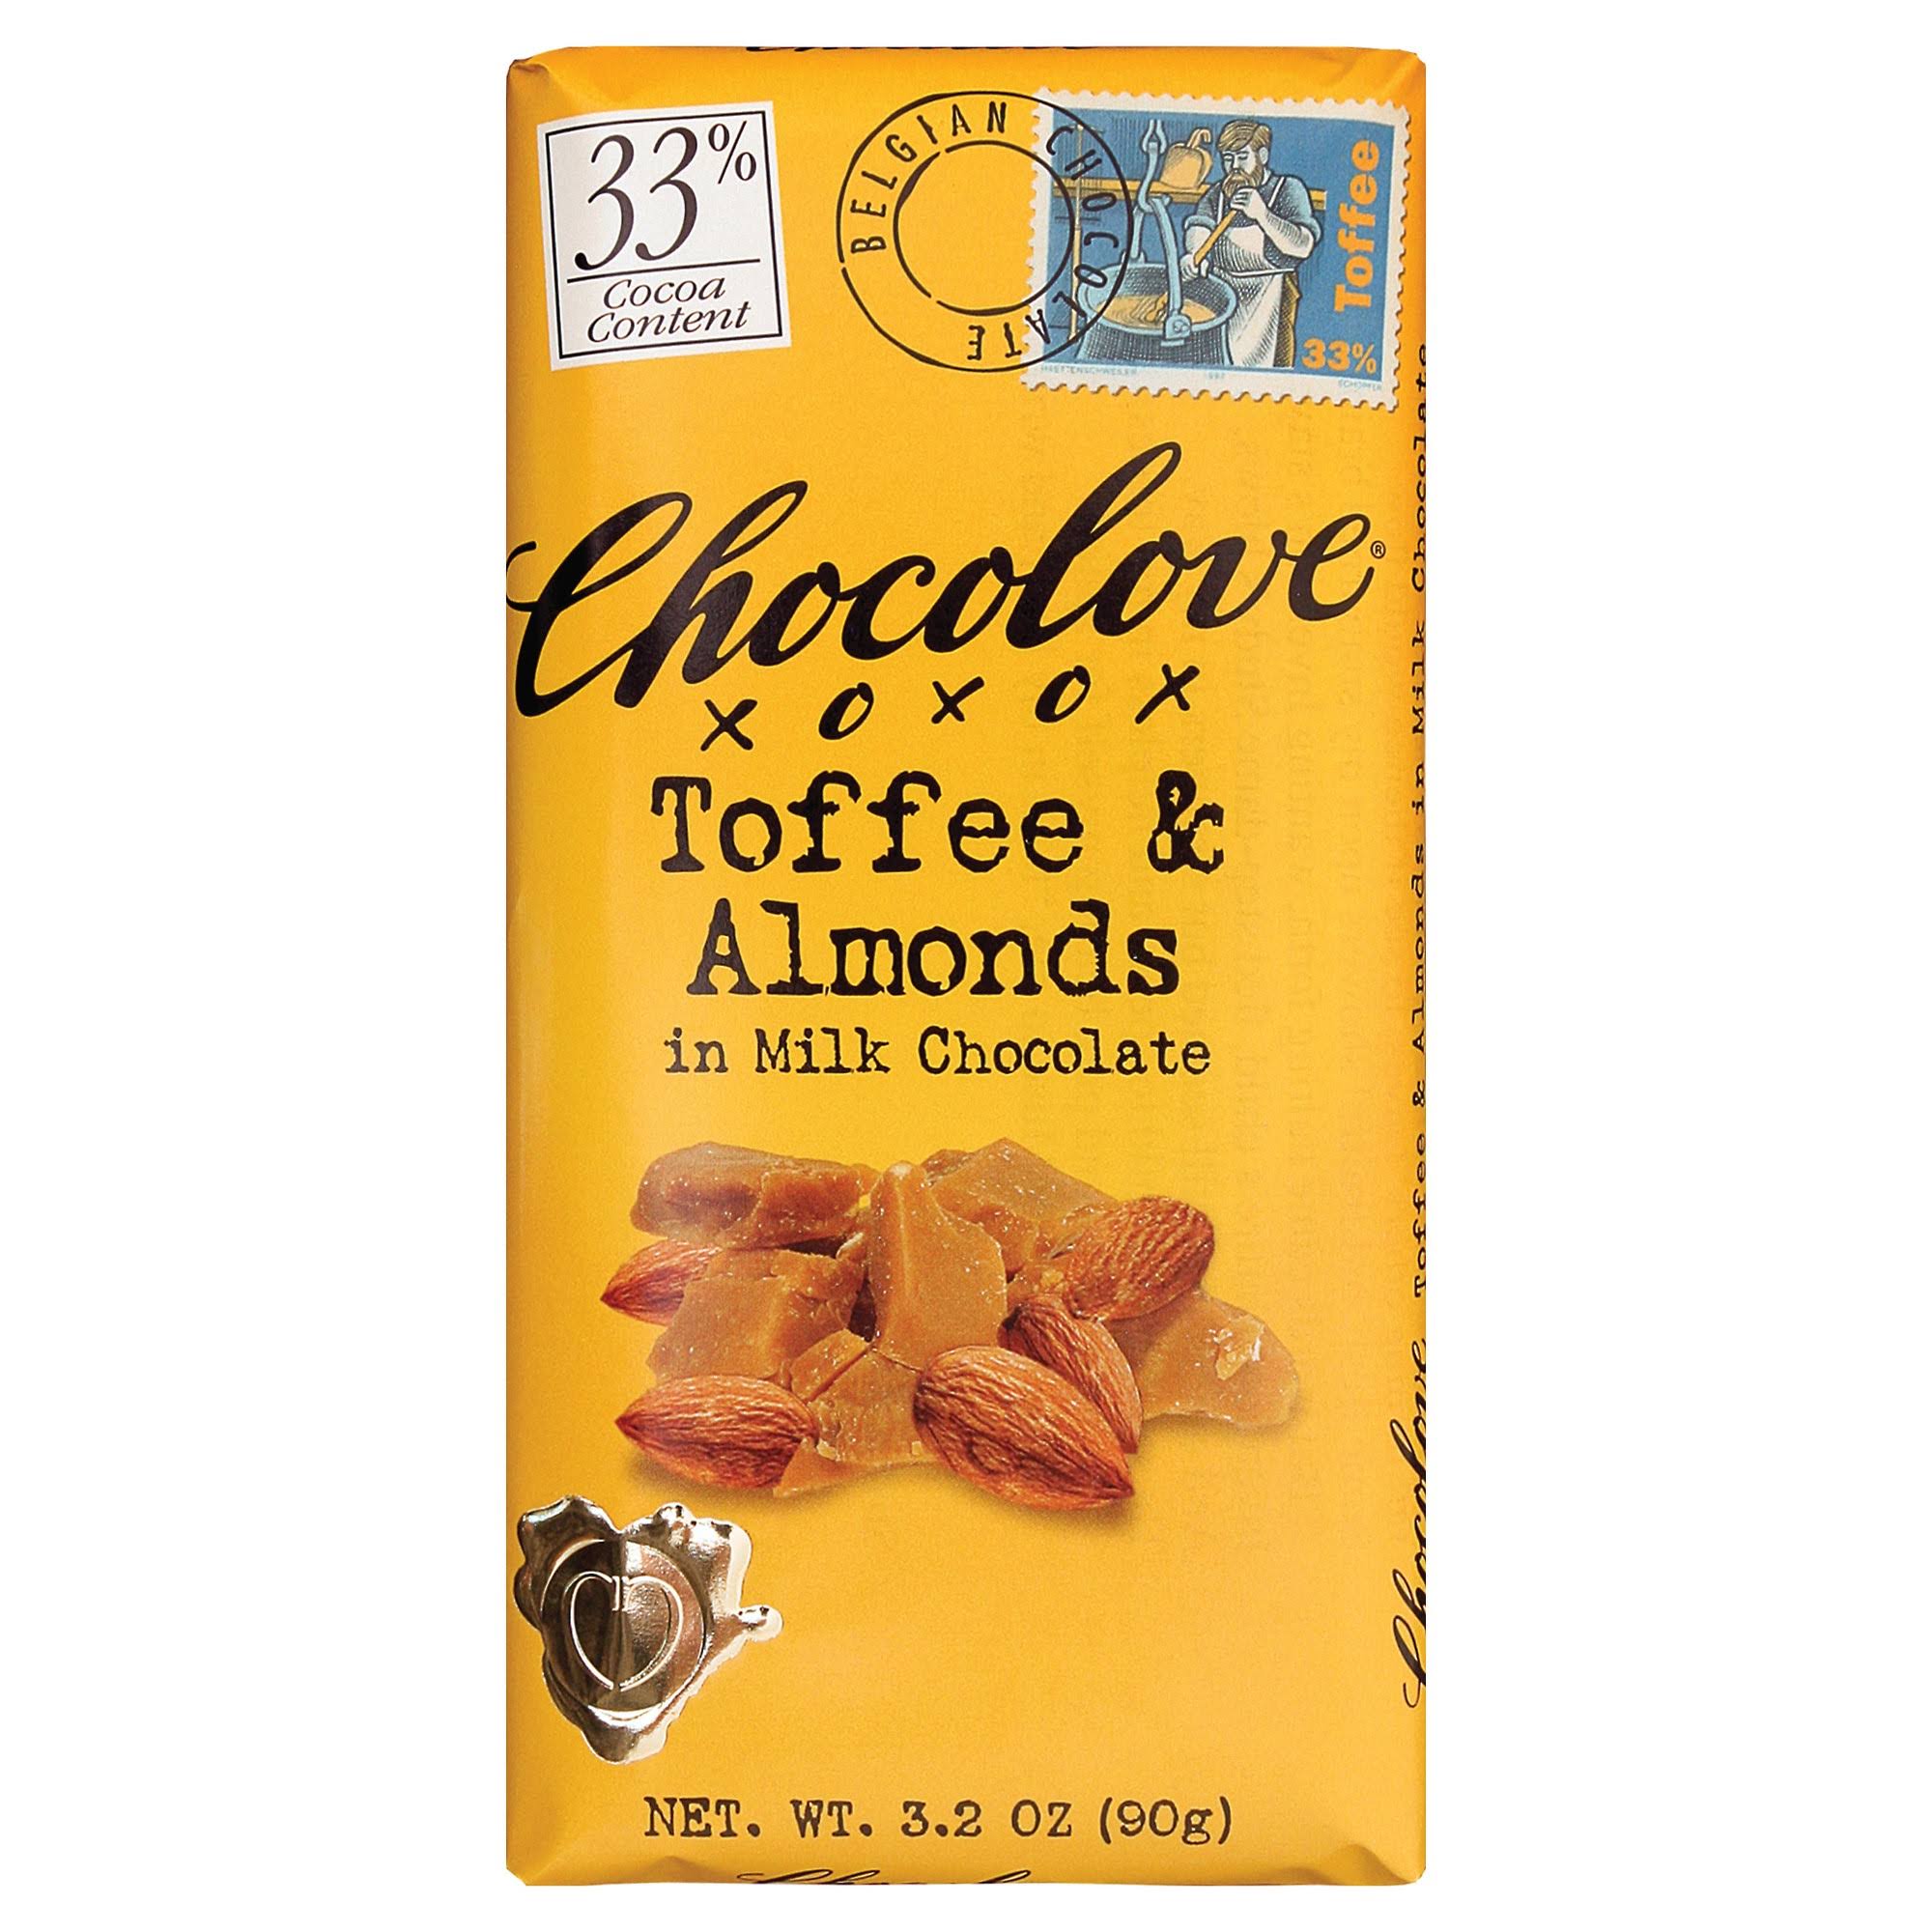 Chocolove Toffee & Almonds In Milk Chocolate